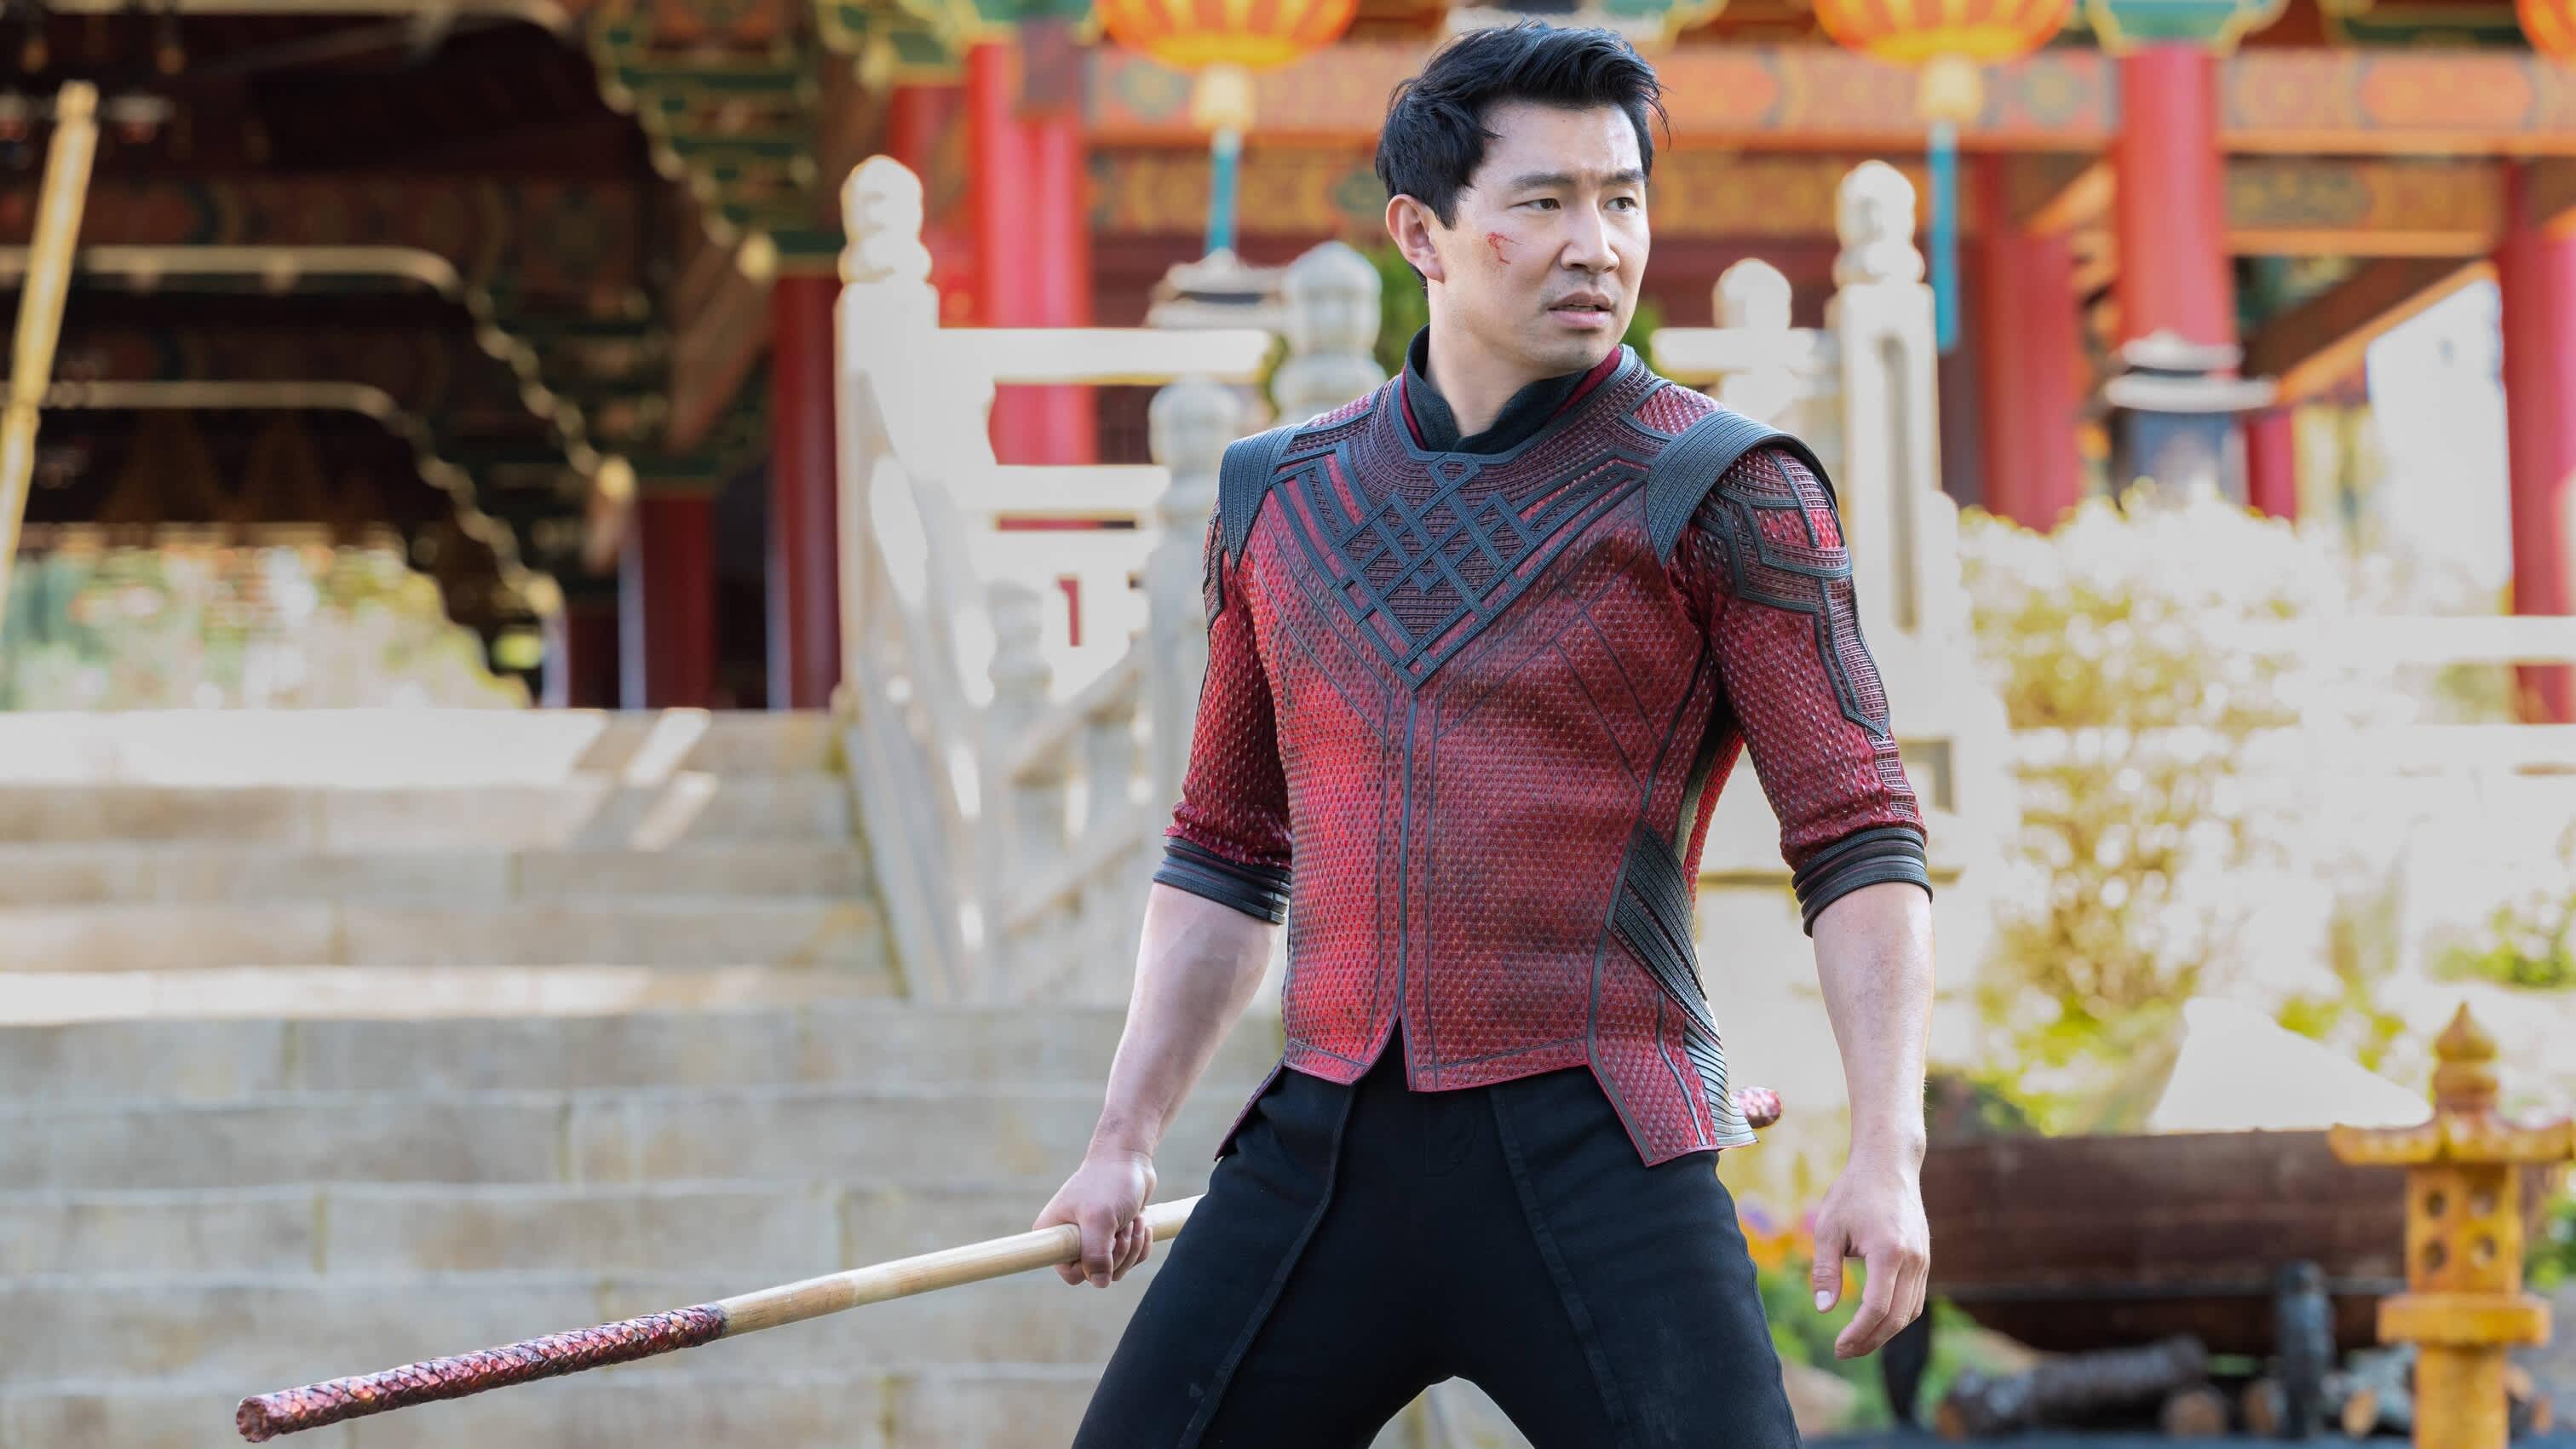 Marvel's 'Shang-Chi' snares $71.4 million in domestic opening, second-highest of..